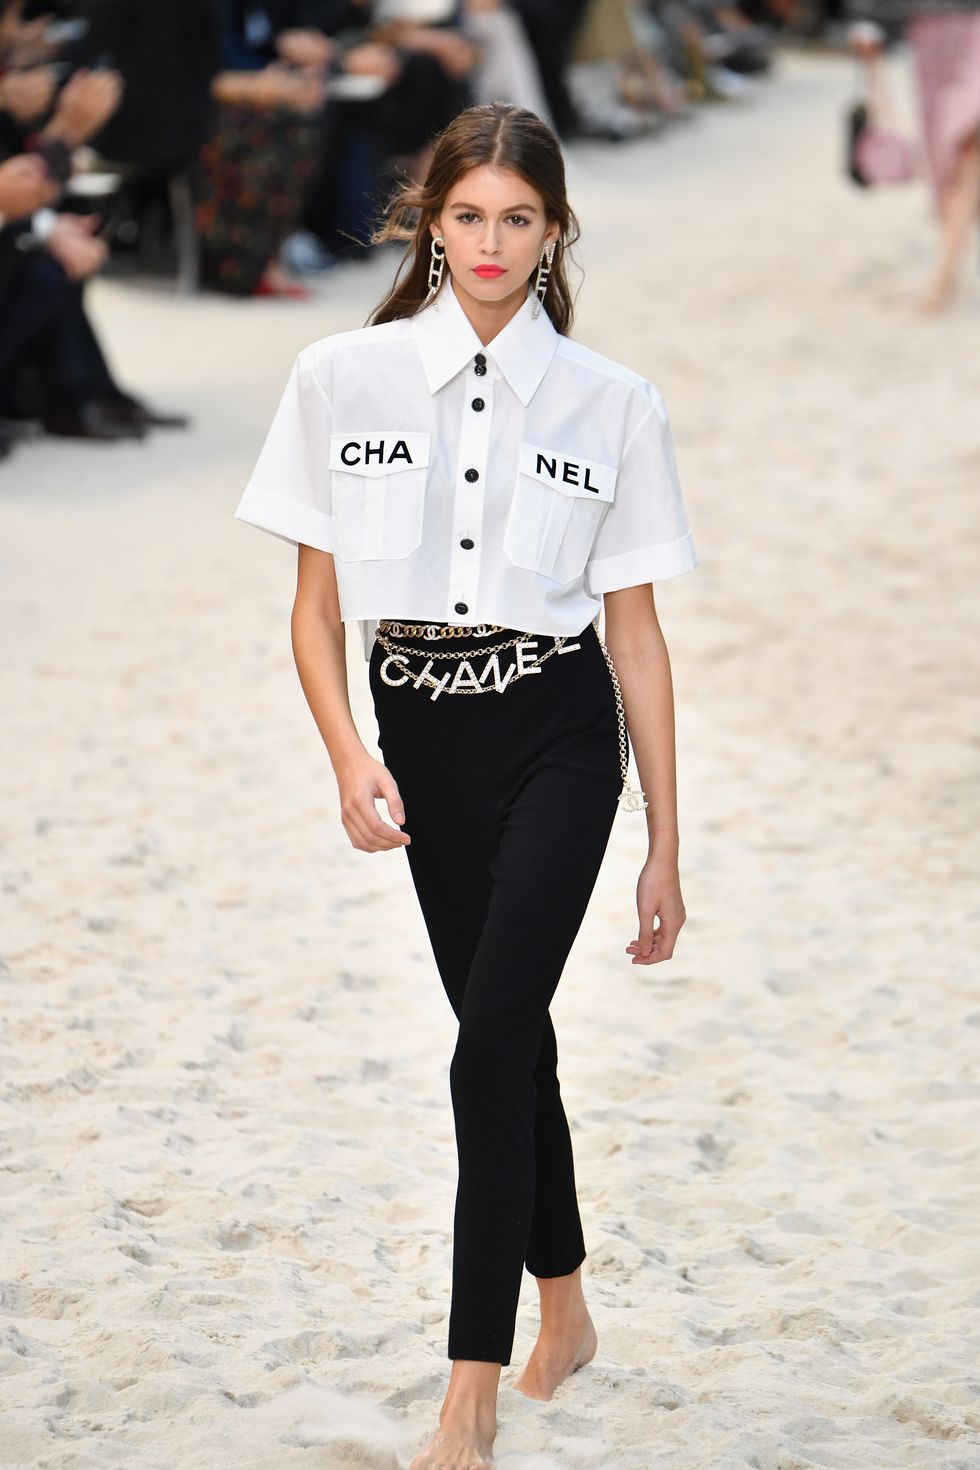 EXCLUSIVE: Chanel Heading to Capri for Its Cruise 2021 Show